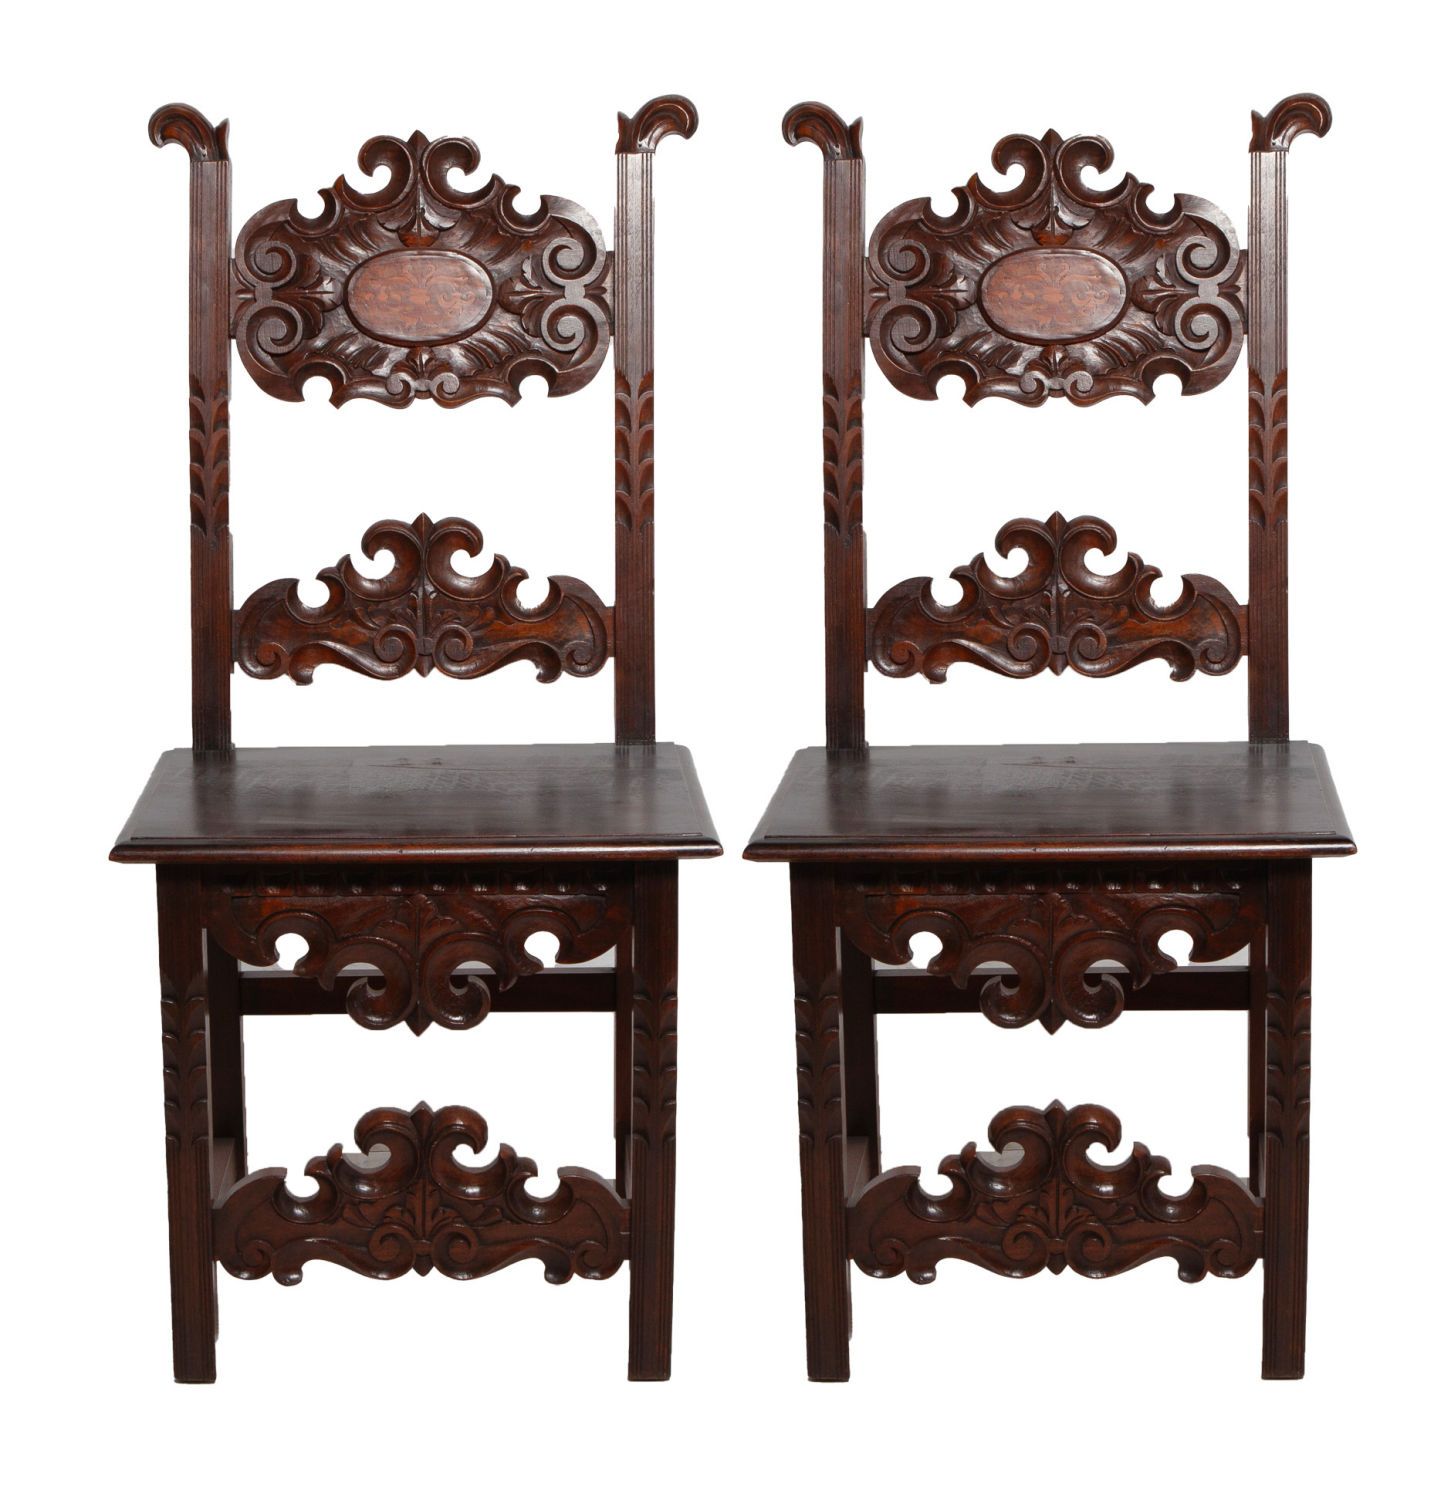 Pair of 19th Century Continental Inlay Wooden Chairs Pair of finely carved woode&hellip;